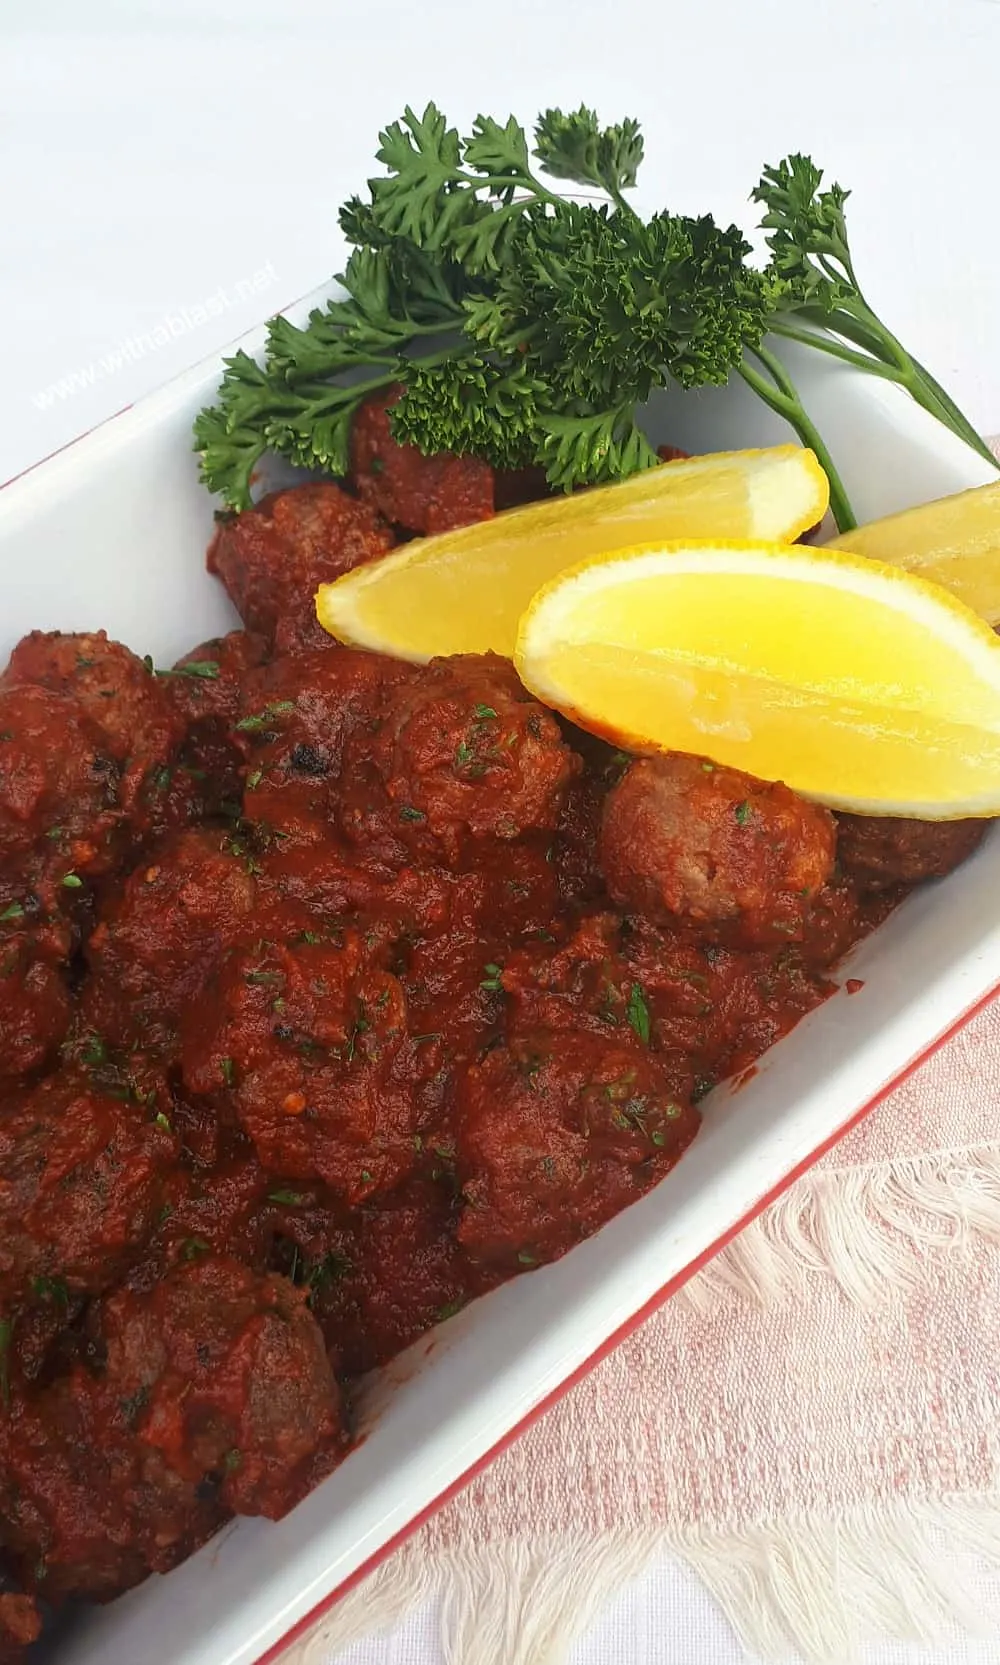 These Turkish Meatballs are made with ground beef and lamb (or choose only one), hugged in an easy to make tomato based sauce